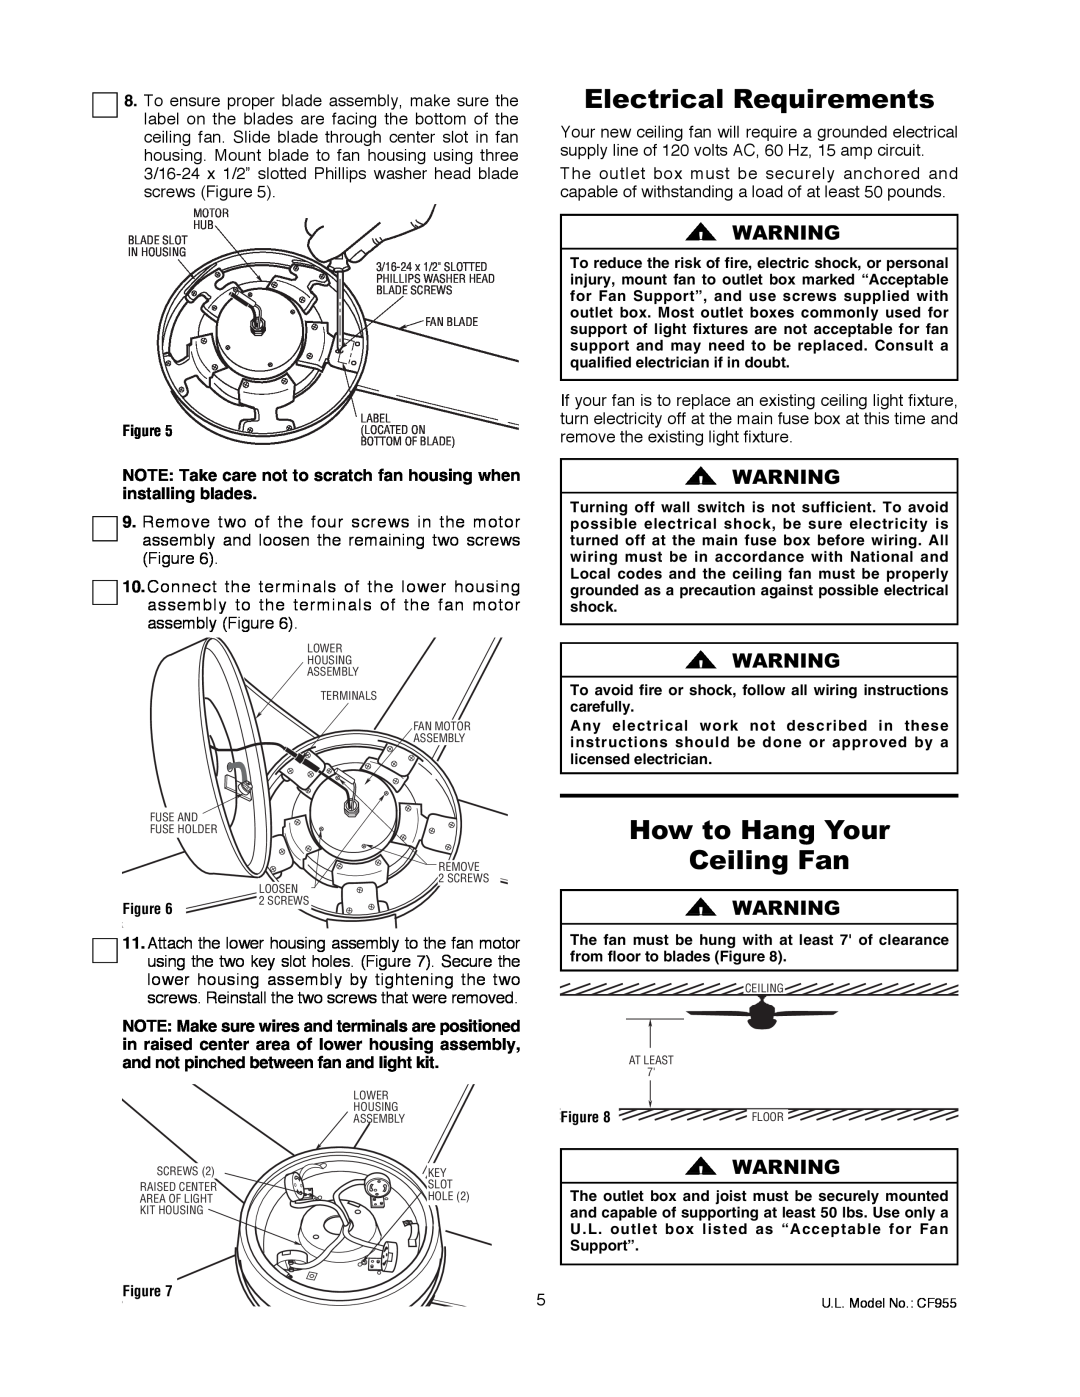 Emerson CF955ORB 00, CF955WW 00, CF955BS 00 owner manual Electrical Requirements, How to Hang Your Ceiling Fan 